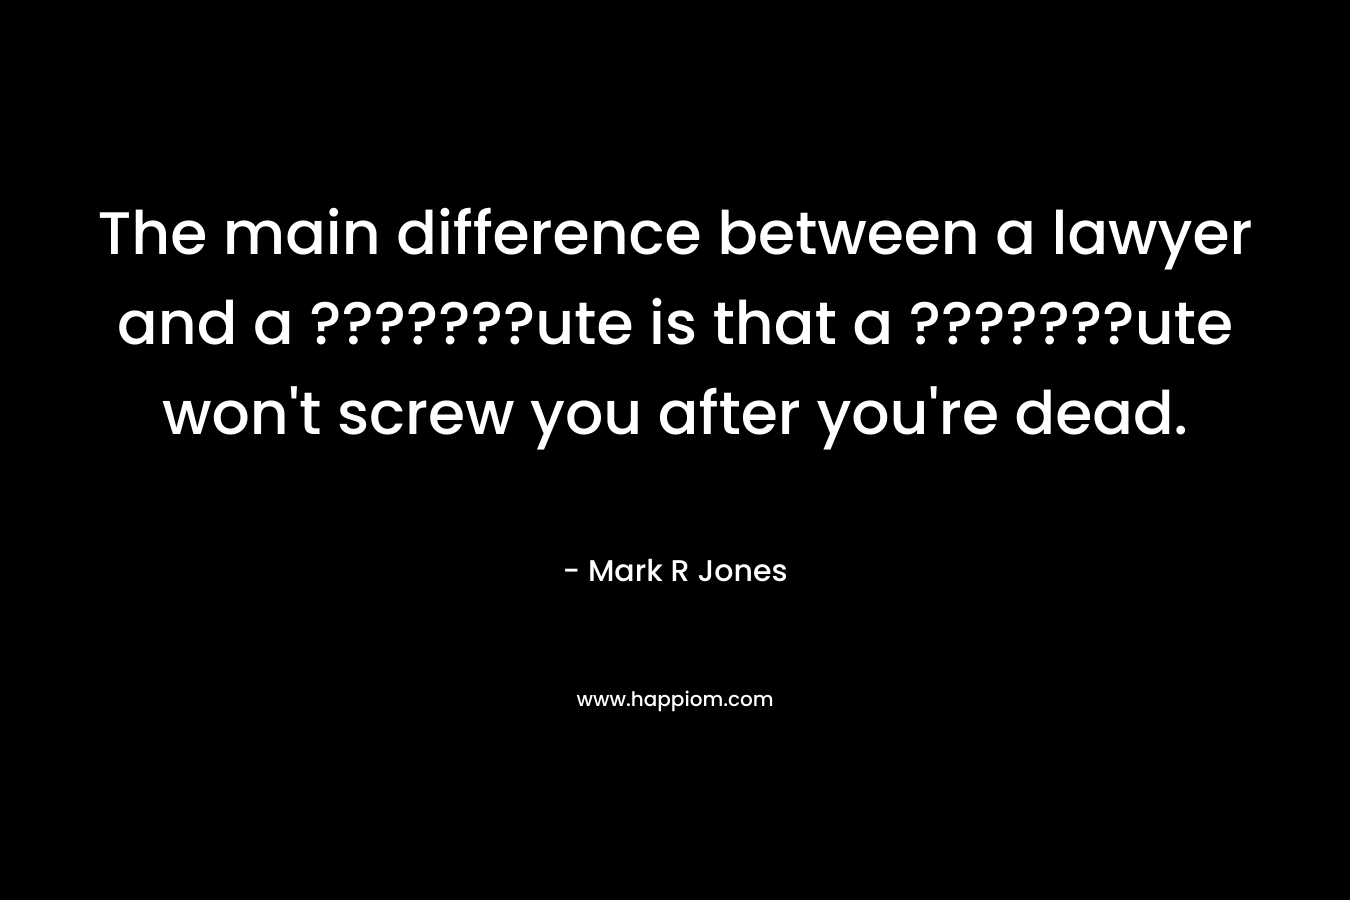 The main difference between a lawyer and a ???????ute is that a ???????ute won't screw you after you're dead.